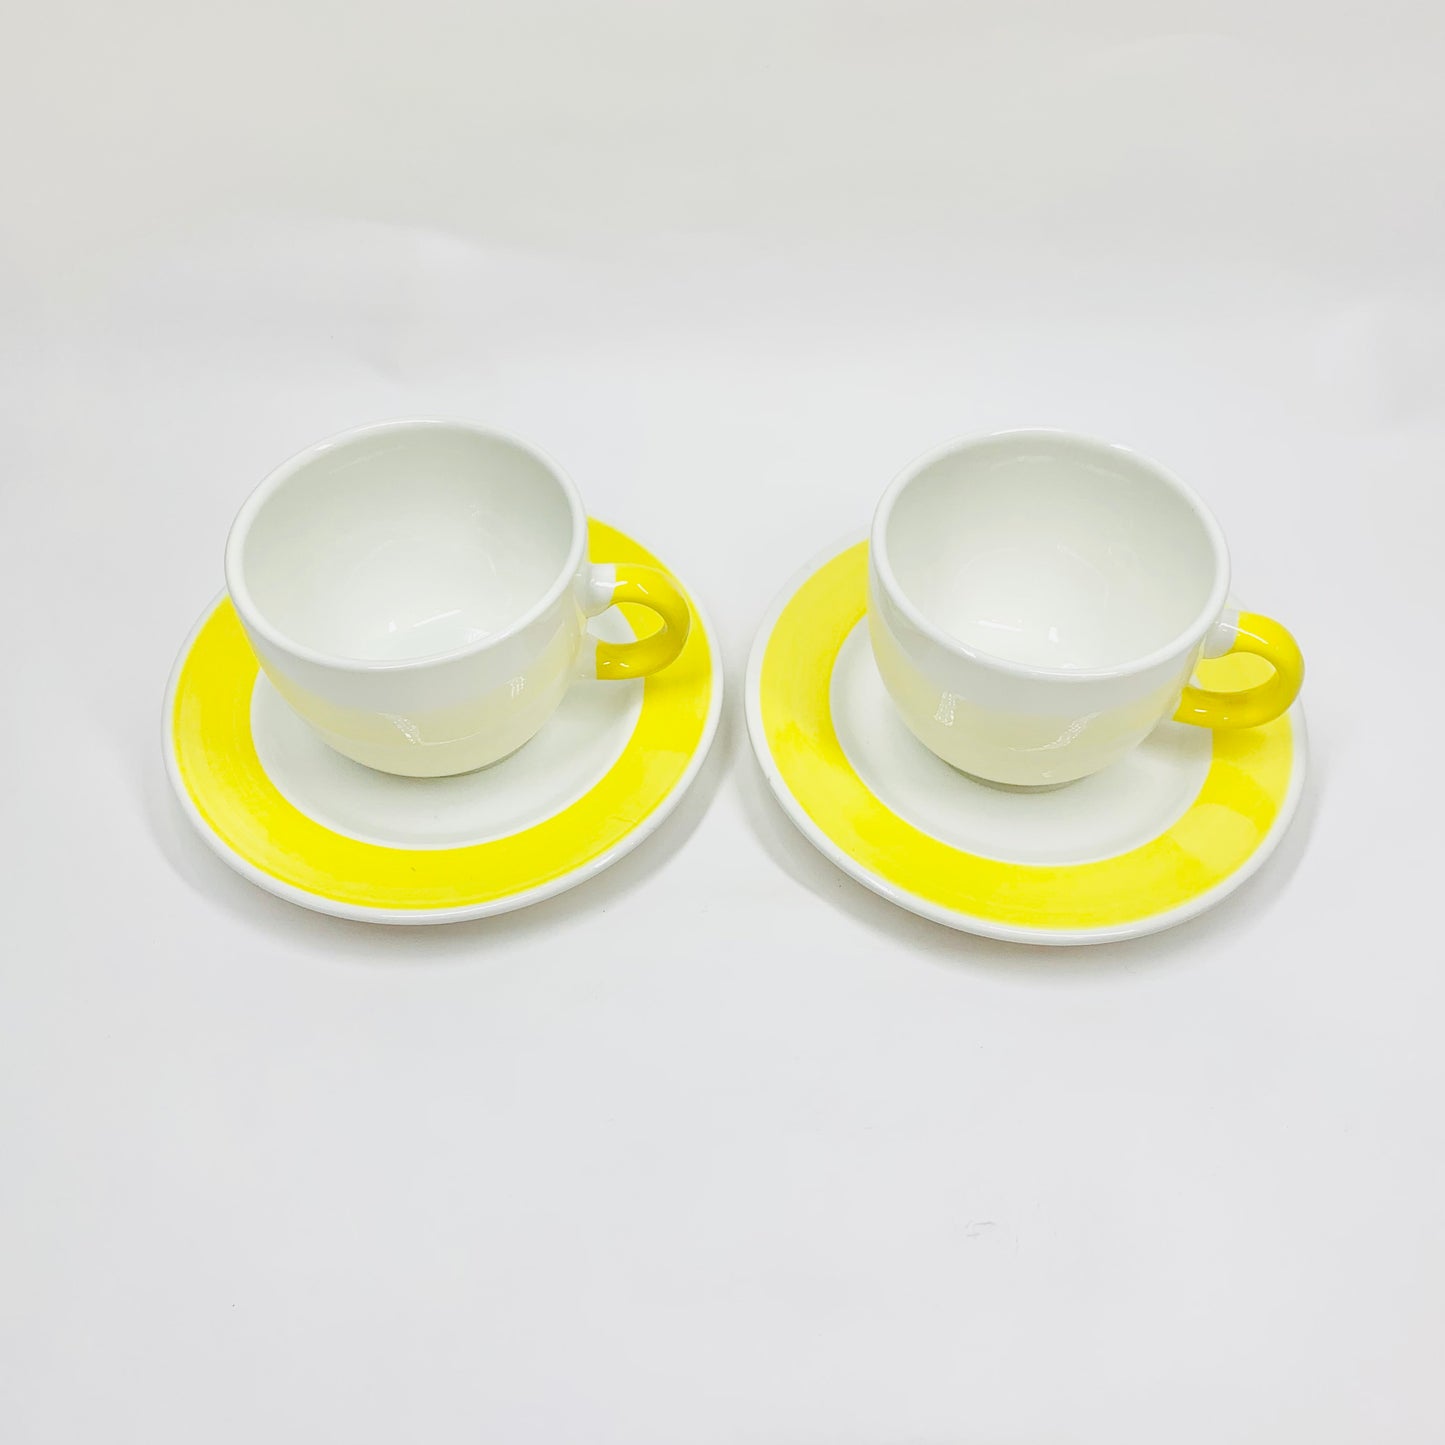 1980s hand painted Italian white porcelain coffee cup and matching saucer with yellow rim